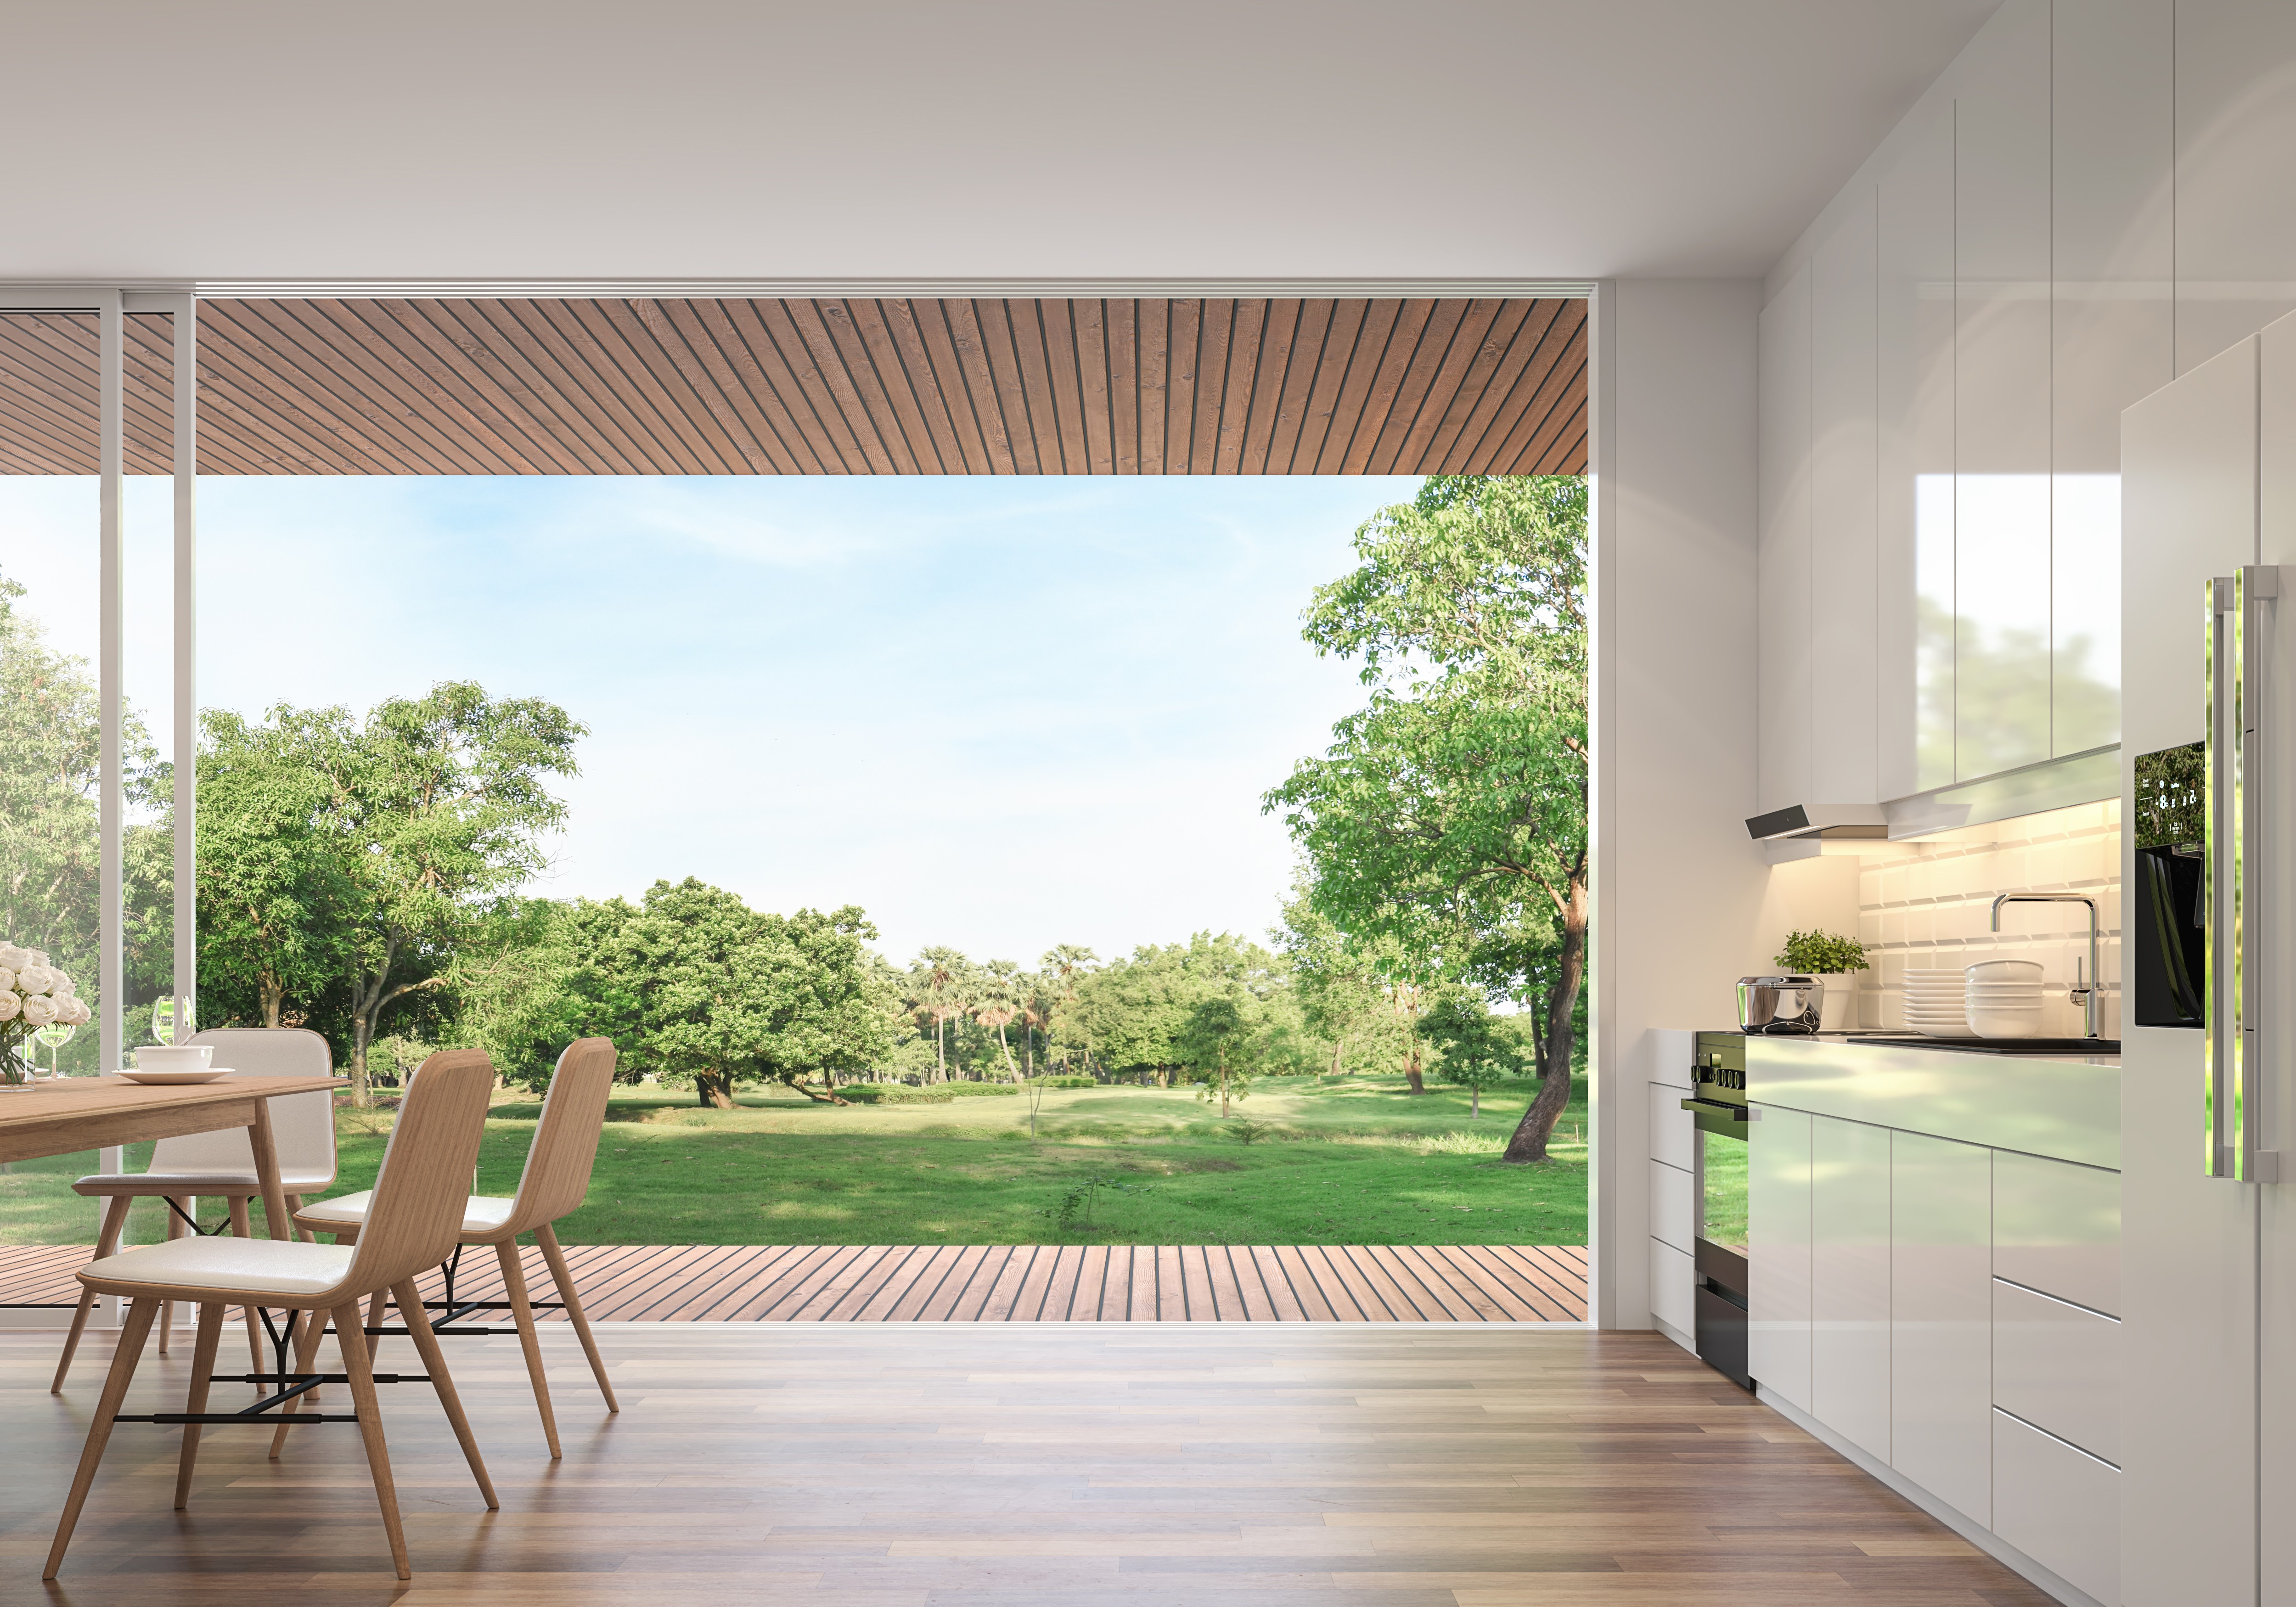 Modern dining room 3d render.Rooms have wooden floors, decorated with wooden furniture and a glossy white kitchen counter with large open doors. Overlooking the terrace and large garden.